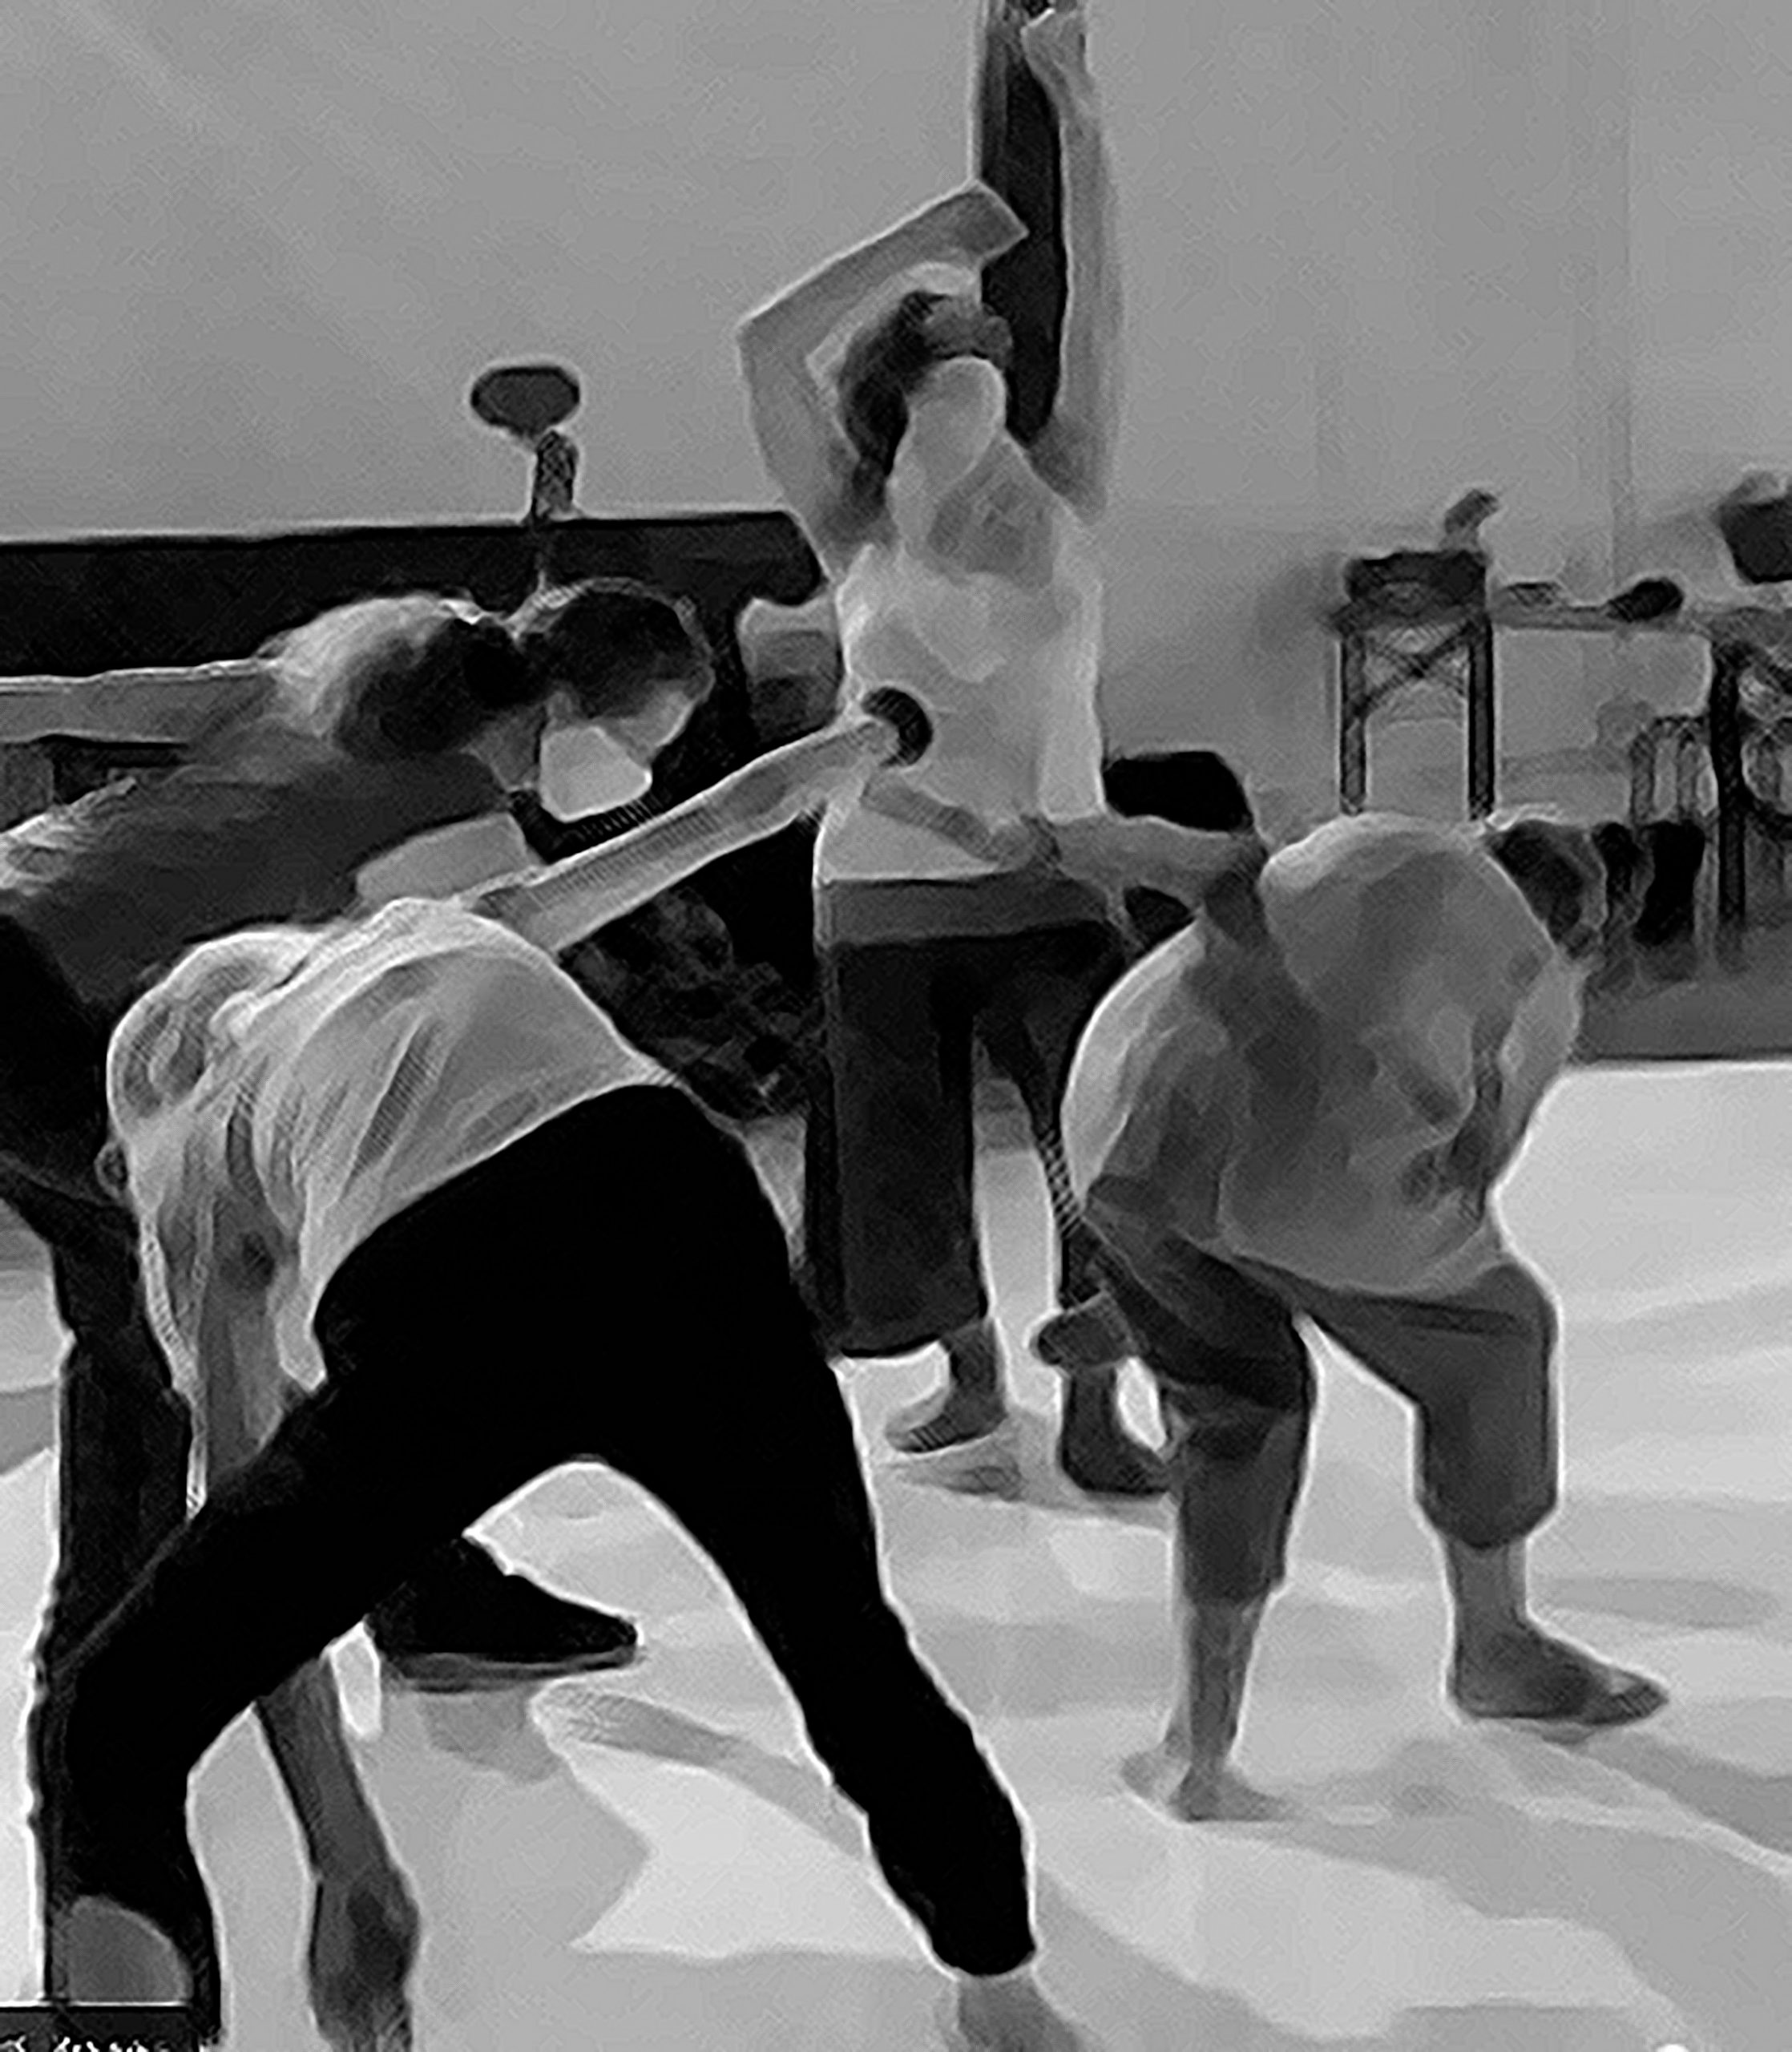 We see four dancers, captured in a black and white photograph, taking quite sculptural shapes on the white circular dance floor